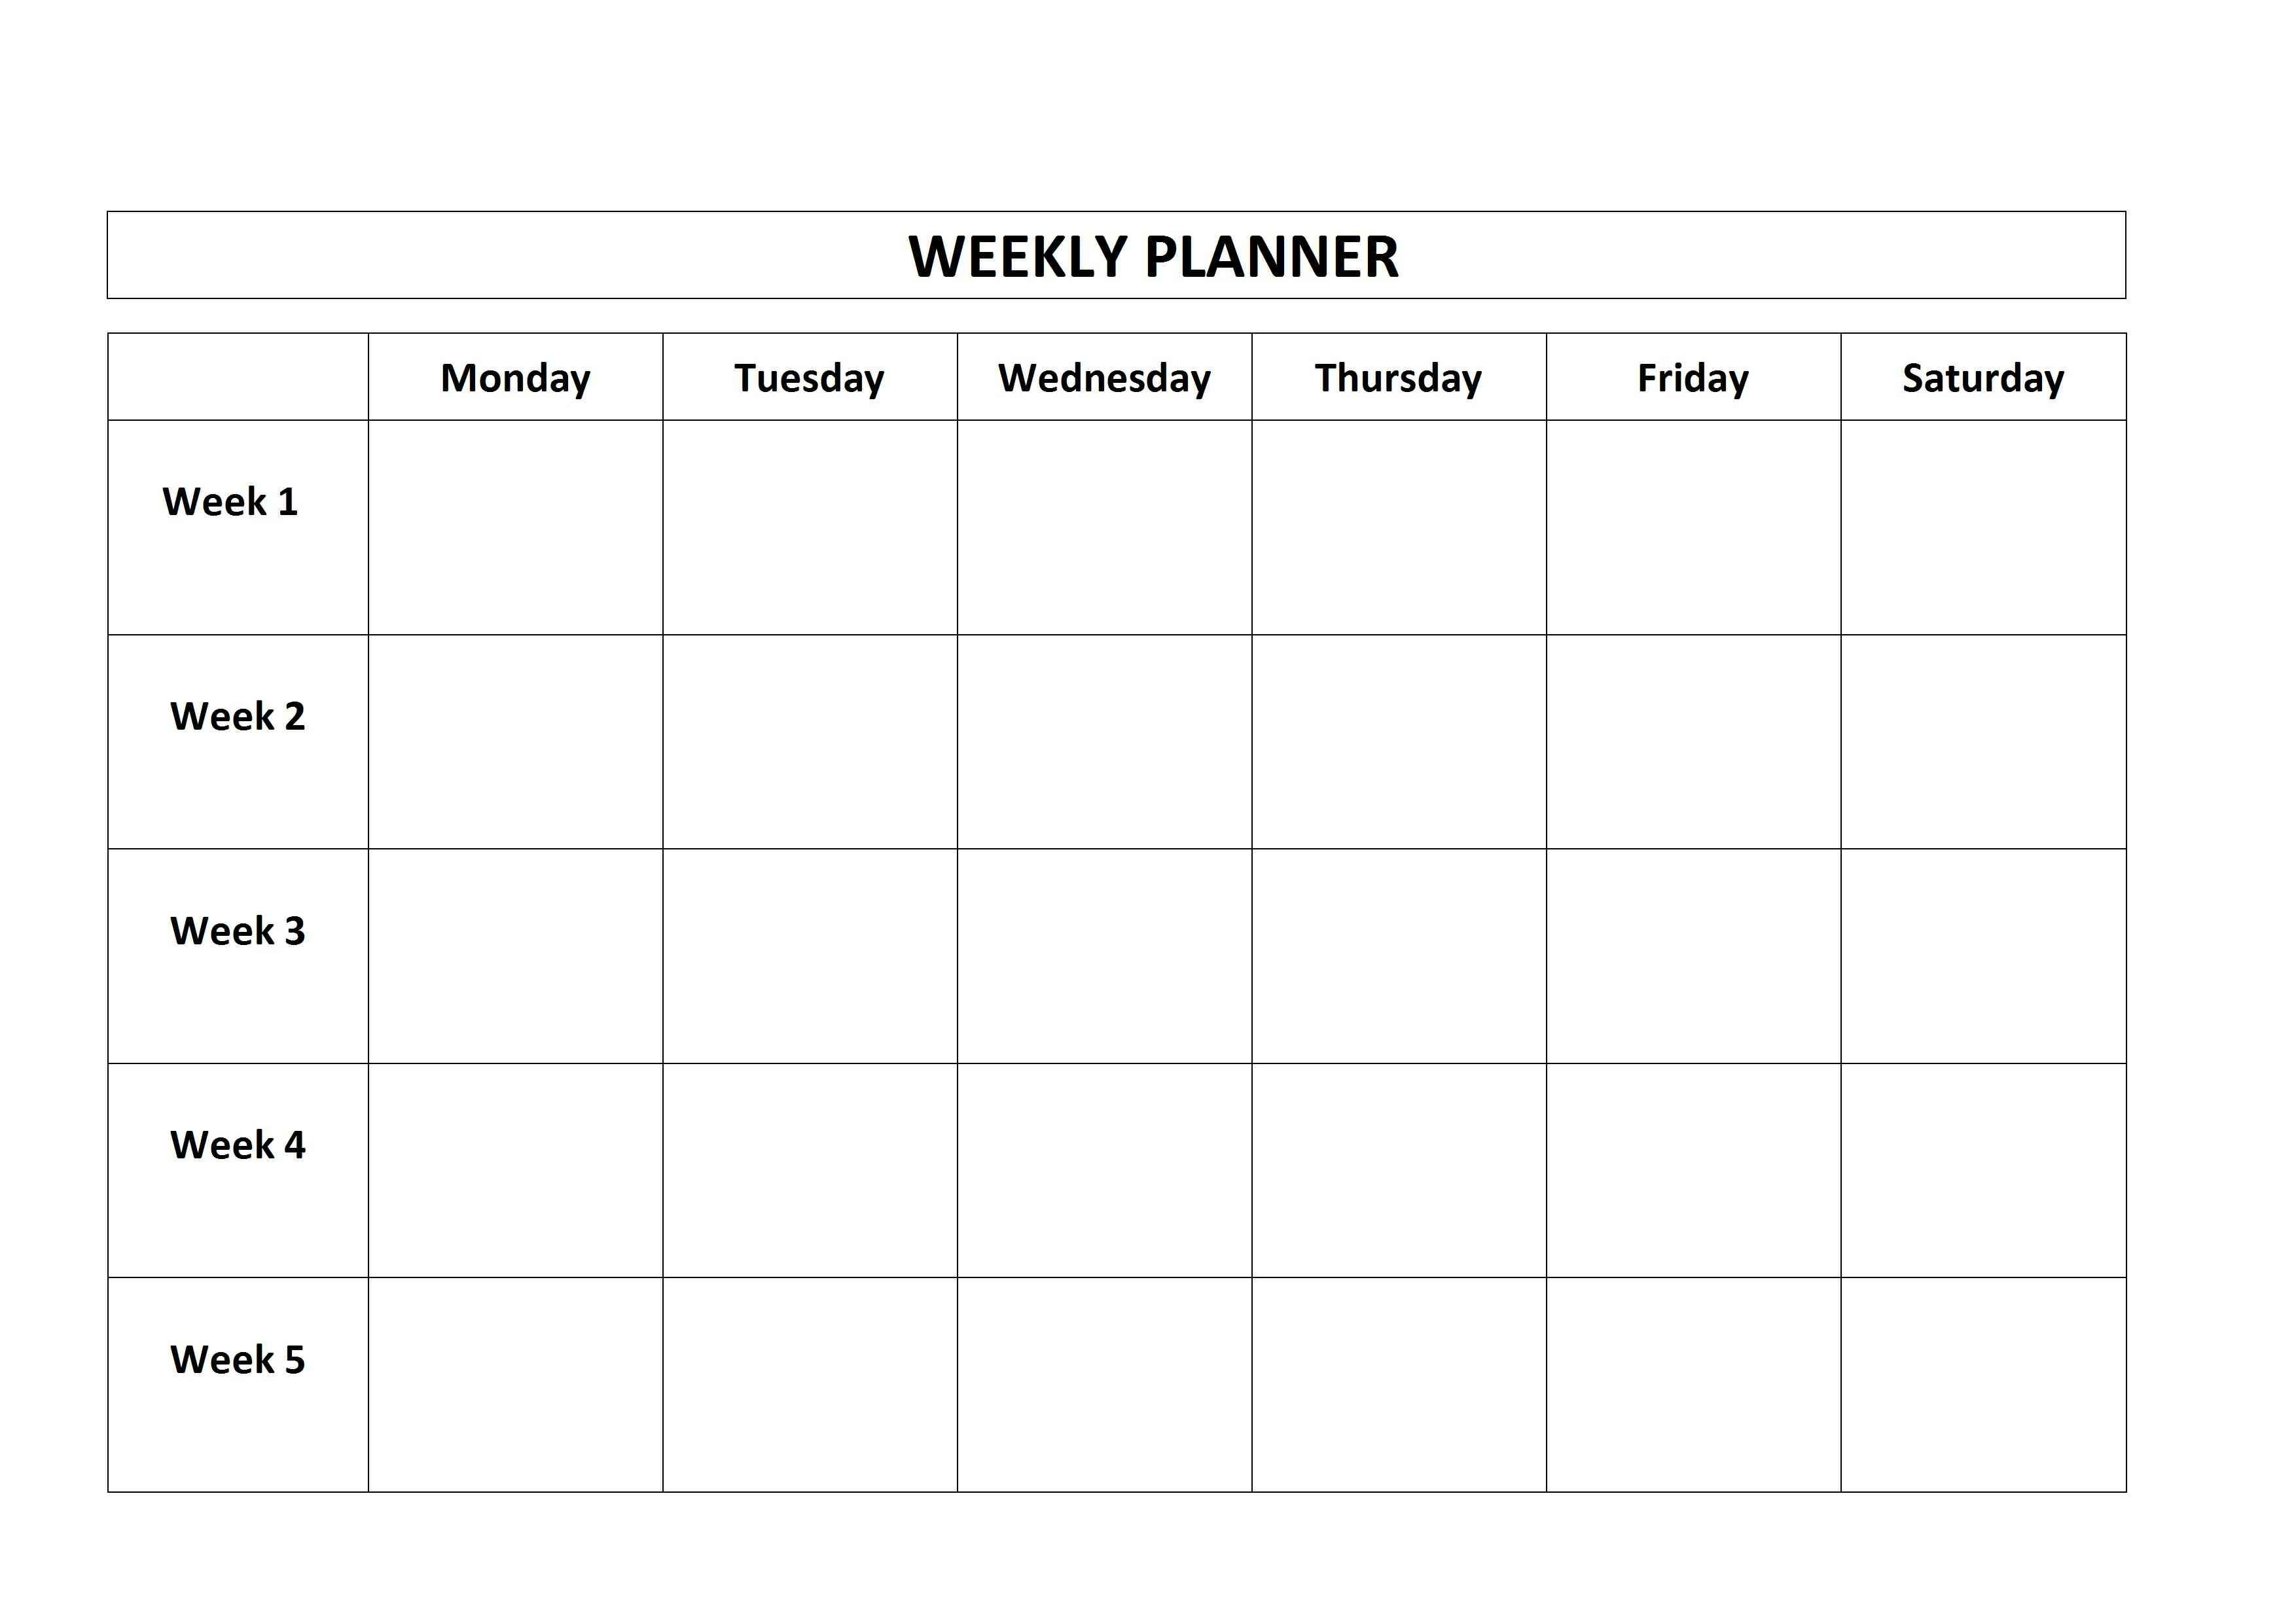 Free Printable Weekly Planner Monday Friday School Calendar intended for Monday Through Friday Blank Calendar